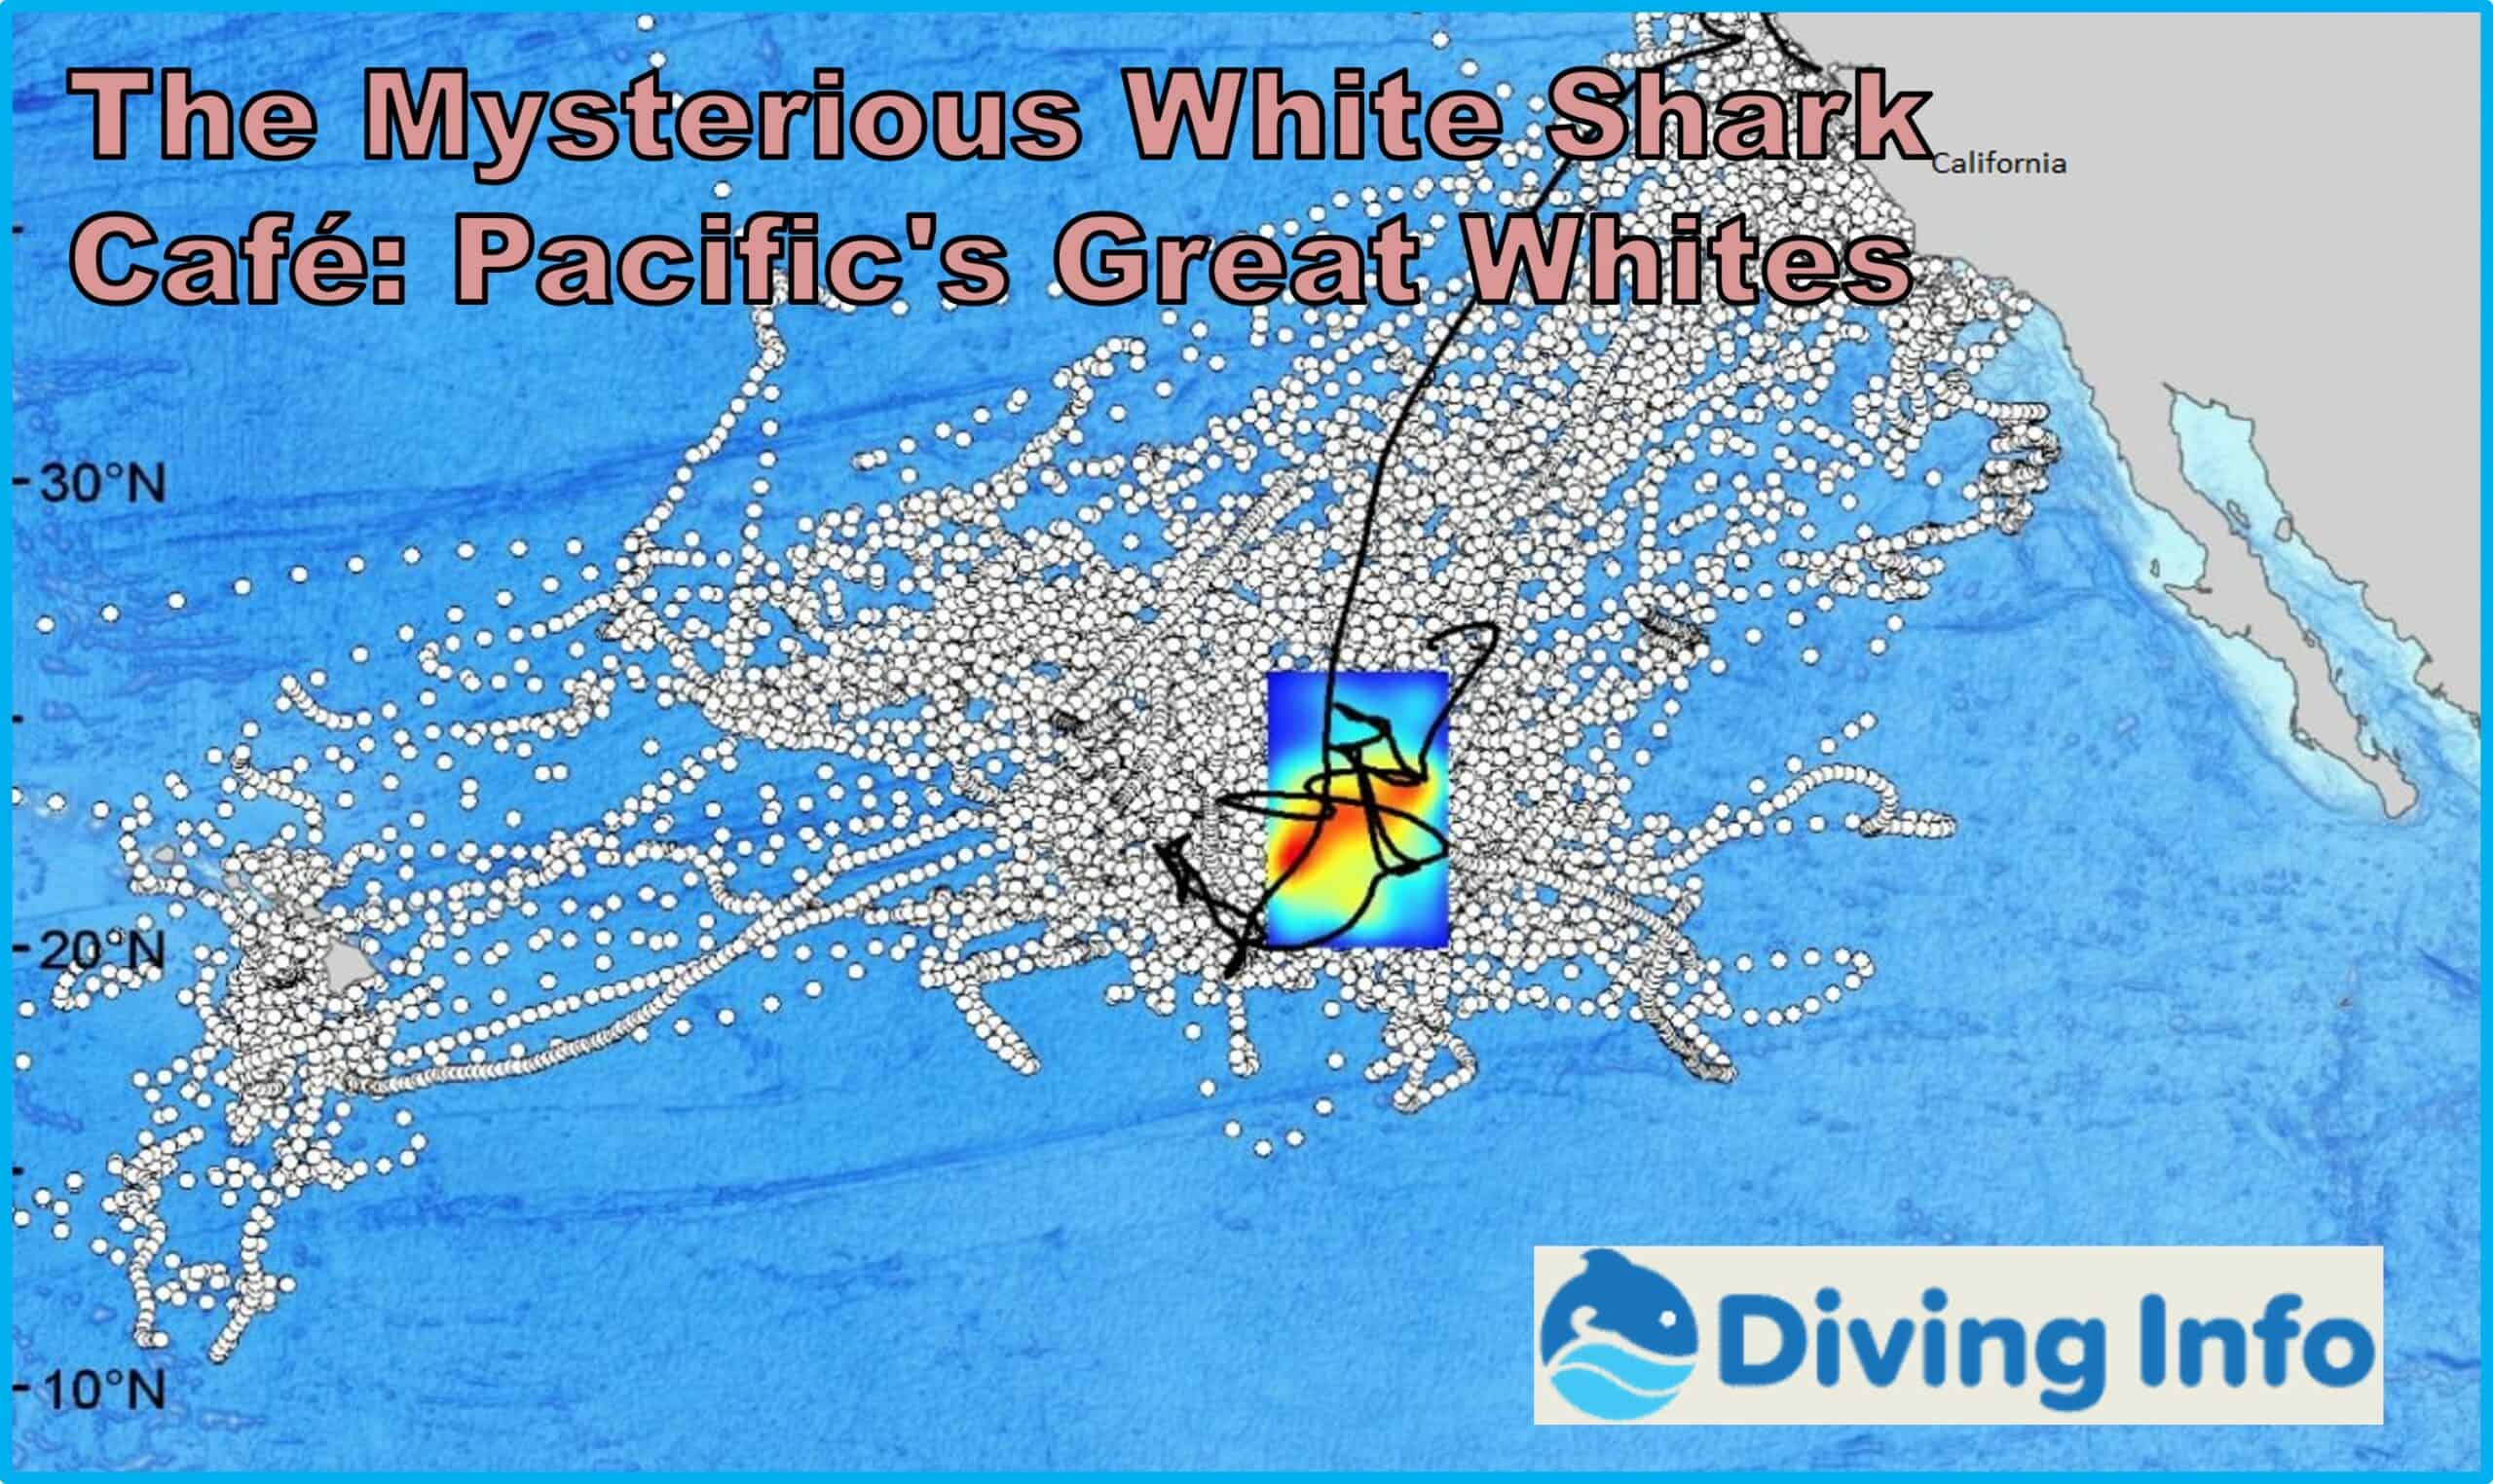 The Mysterious White Shark Café Pacifics Great Whites